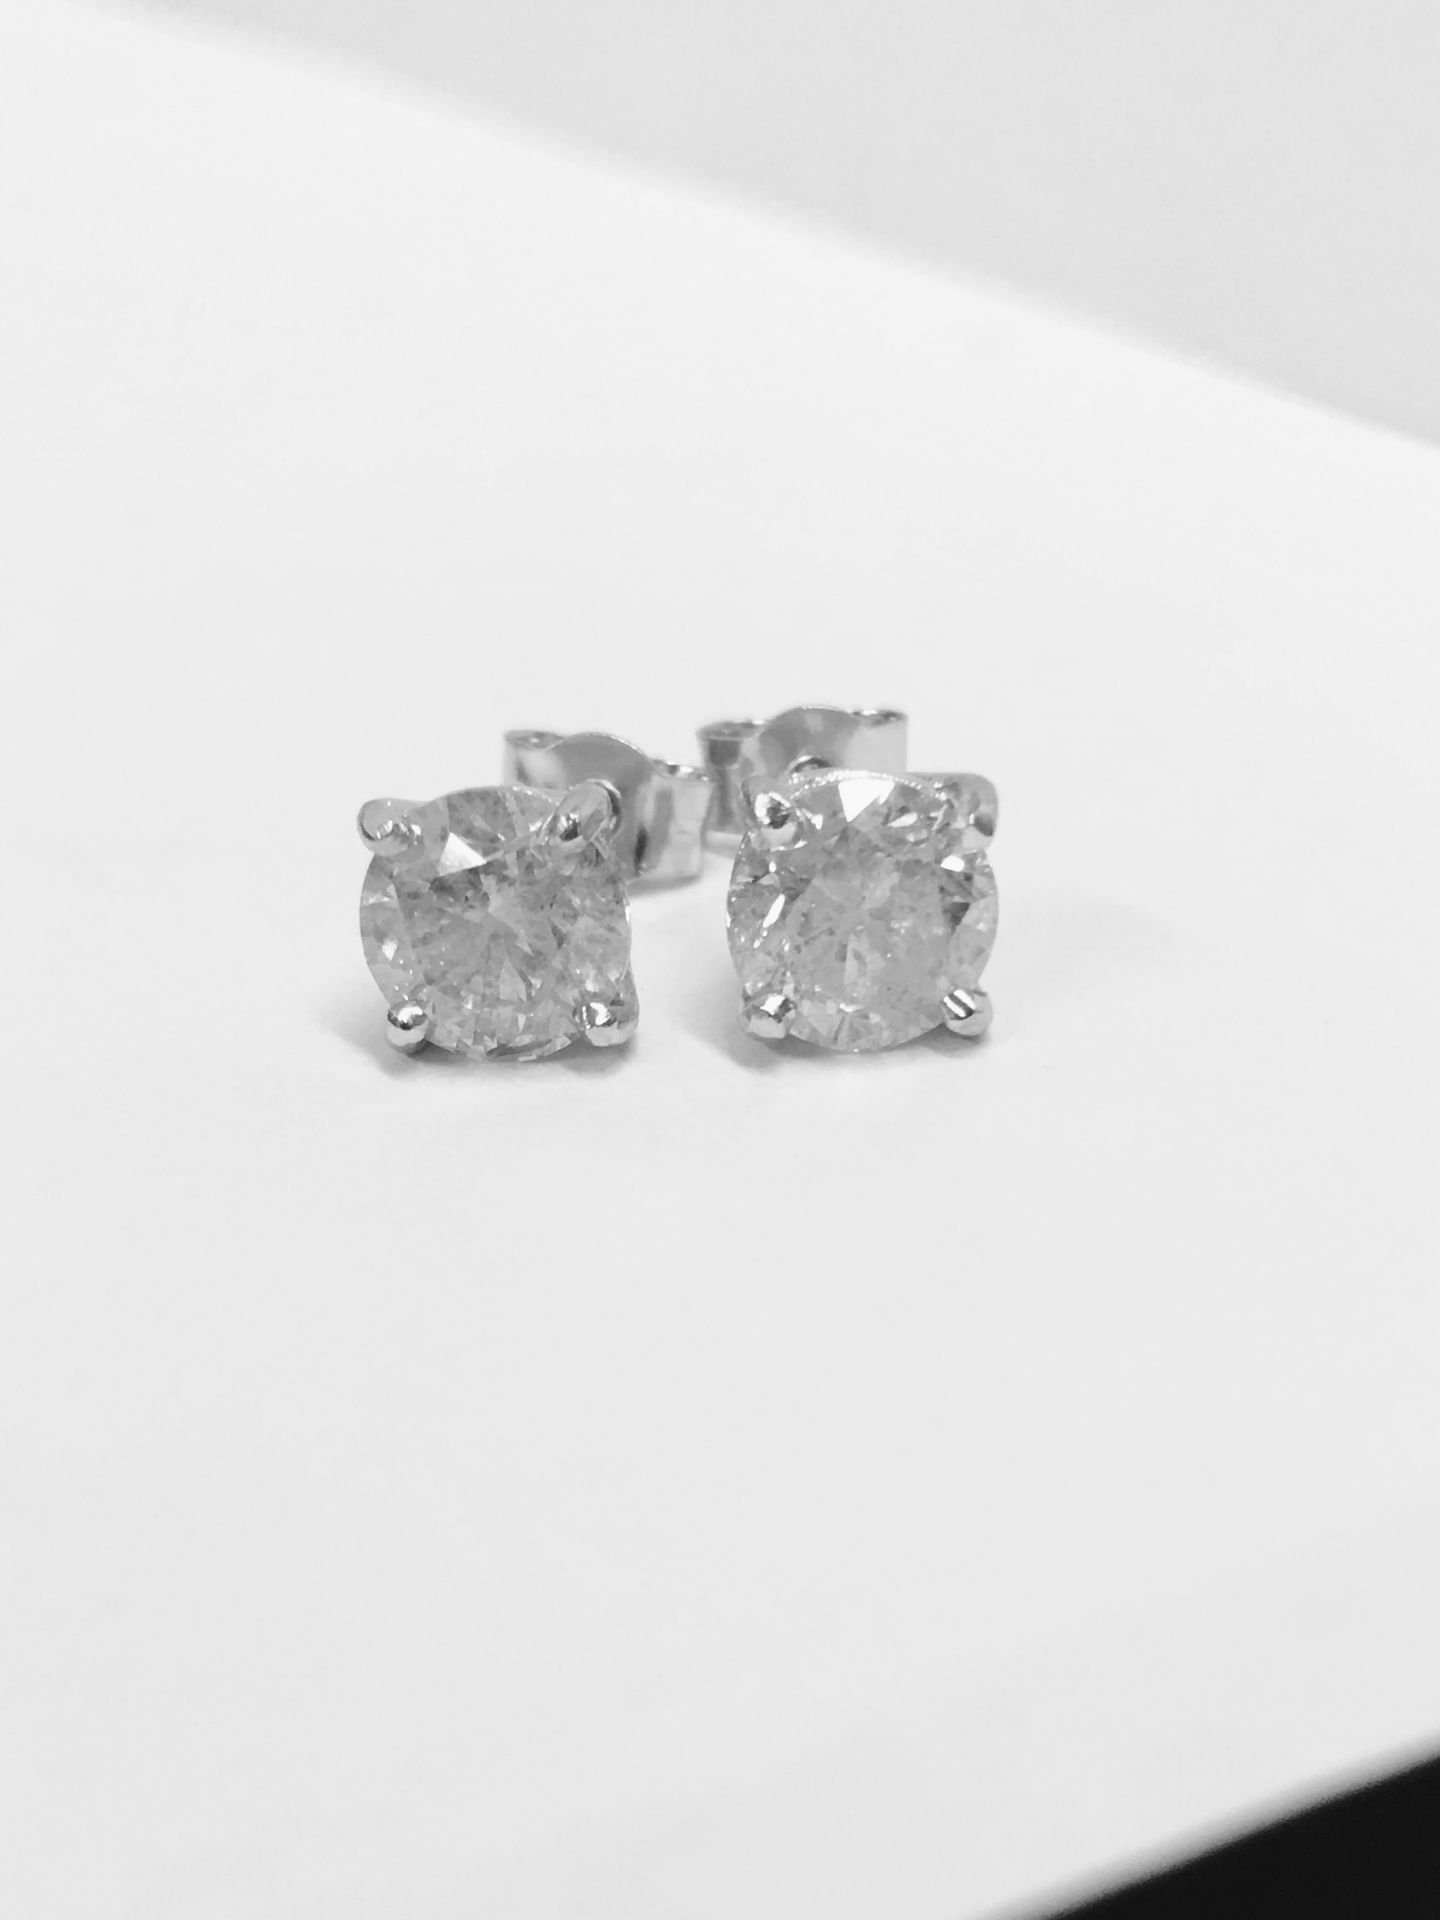 2.00ct Solitaire Diamond Stud Earrings Set With Brilliant Cut Diamonds Which Have Been Enhanced - Image 2 of 3